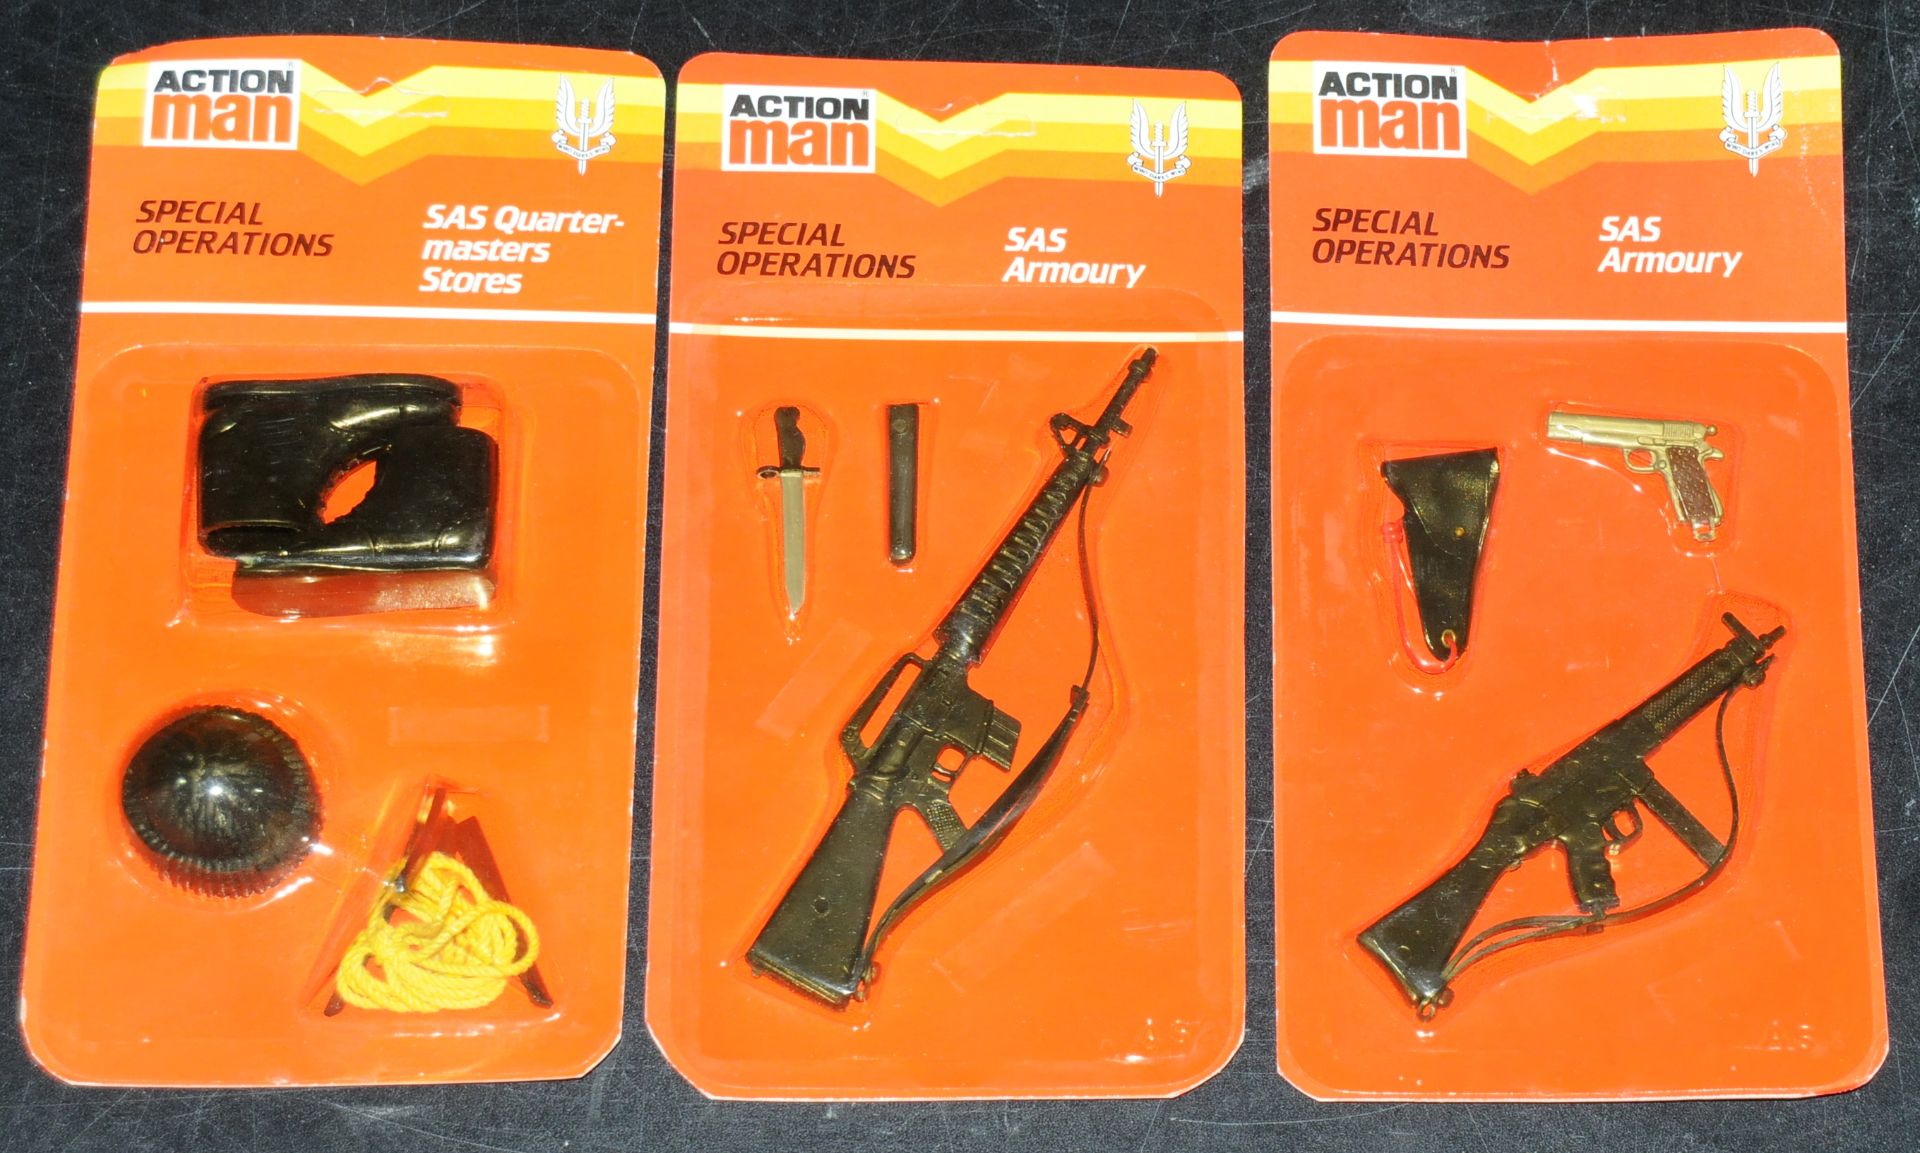 Palitoy Action Man Vintage accessory packs group (1) SAS Armoury Special Operations - Rifle, Pist...